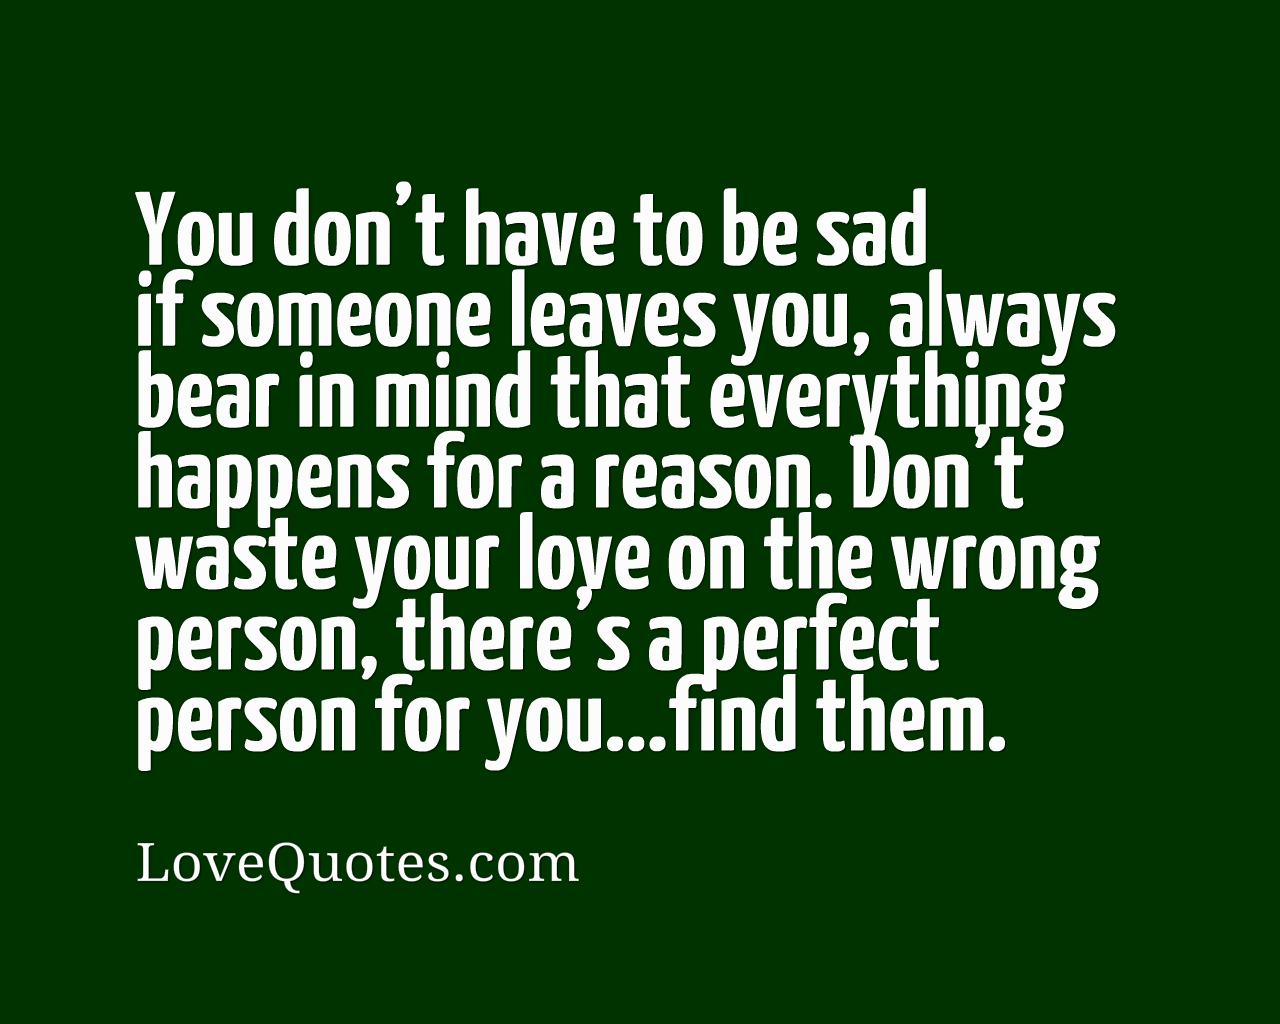 You Don’t Have To Be Sad